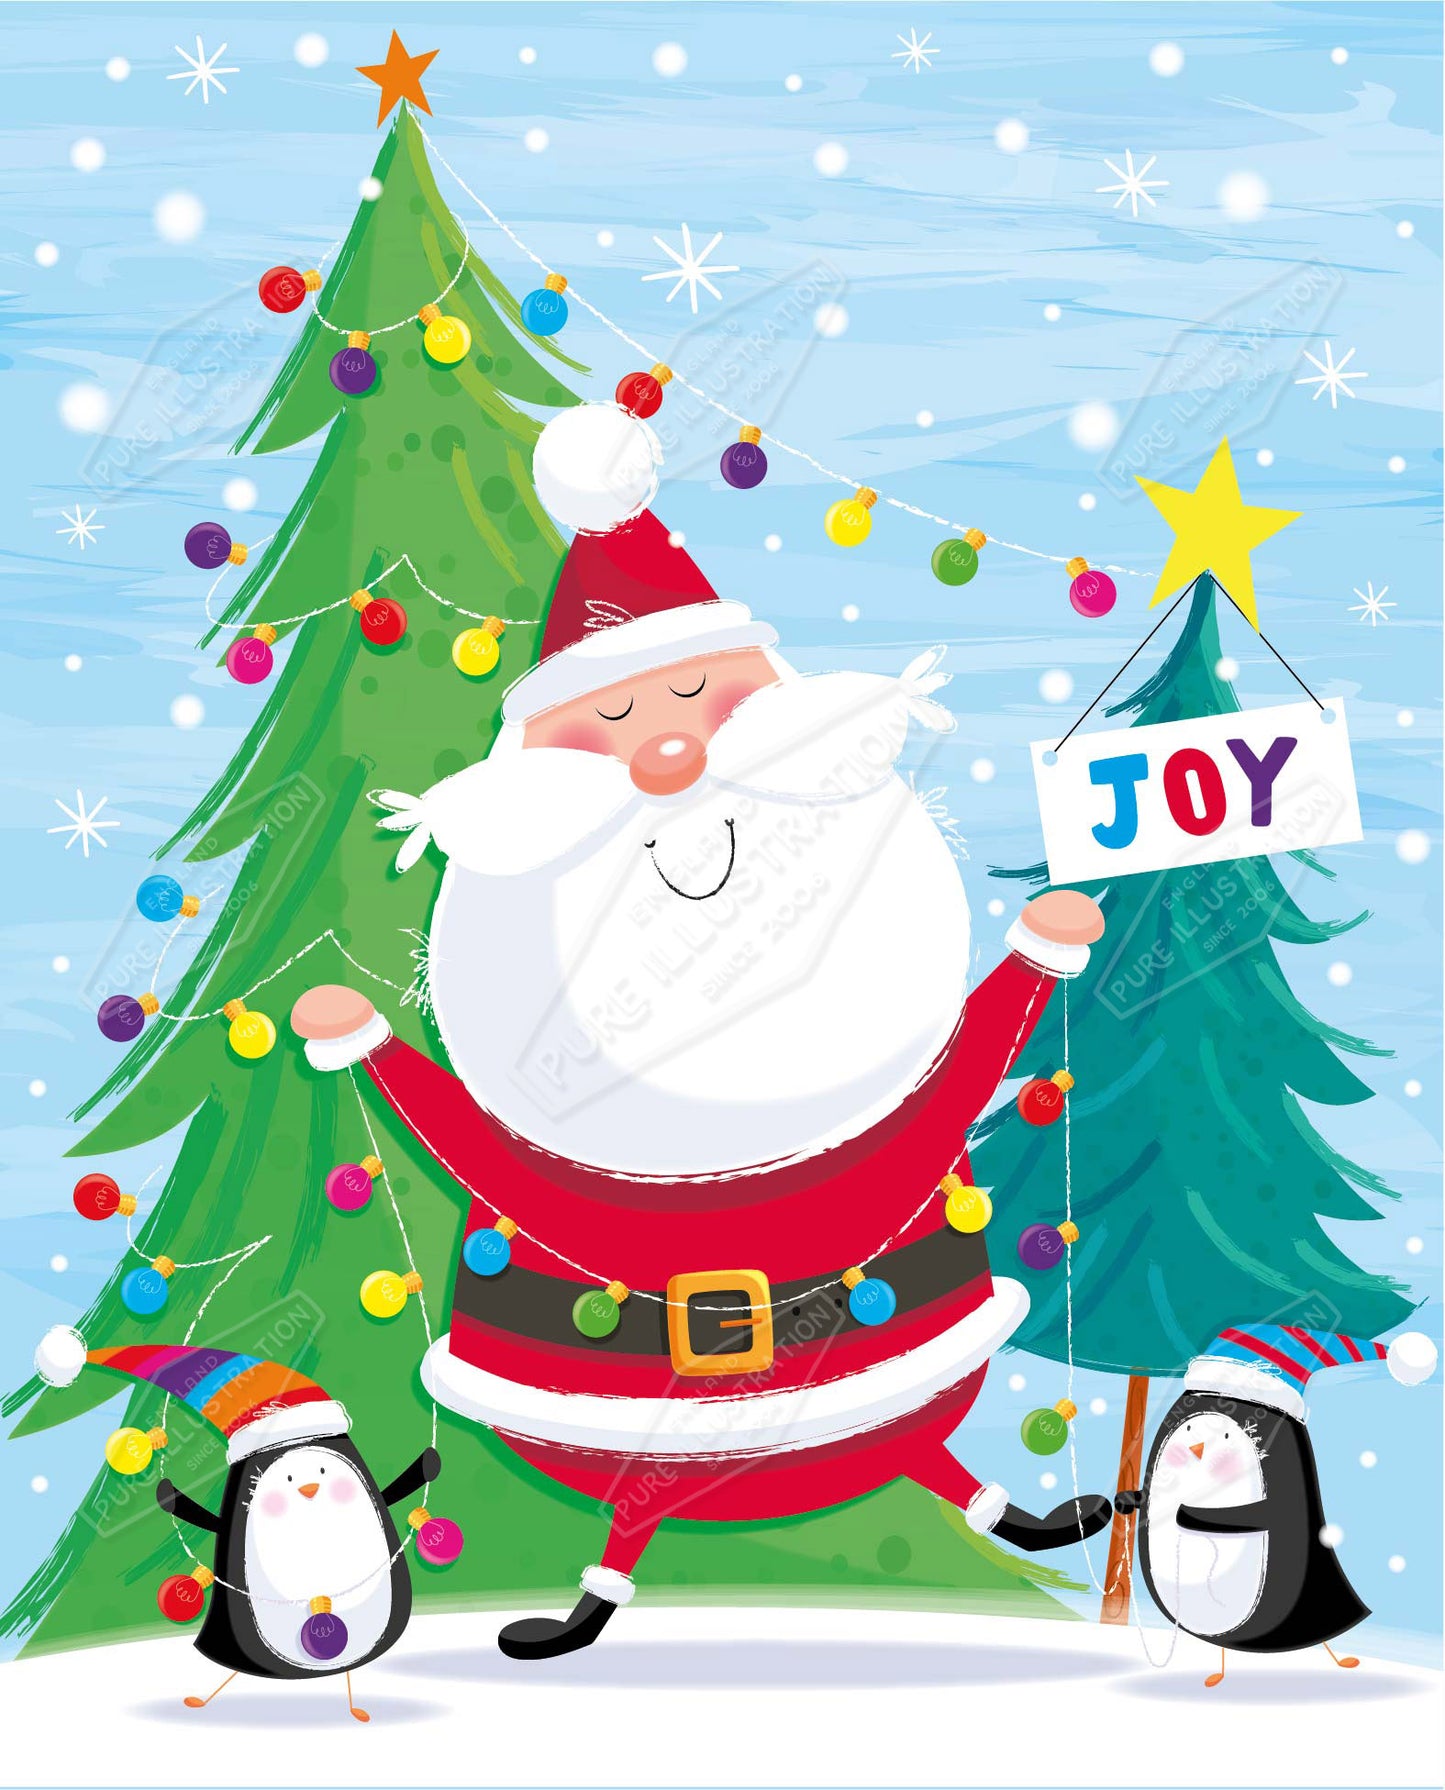 00035195SPI- Sarah Pitt is represented by Pure Art Licensing Agency - Christmas Greeting Card Design